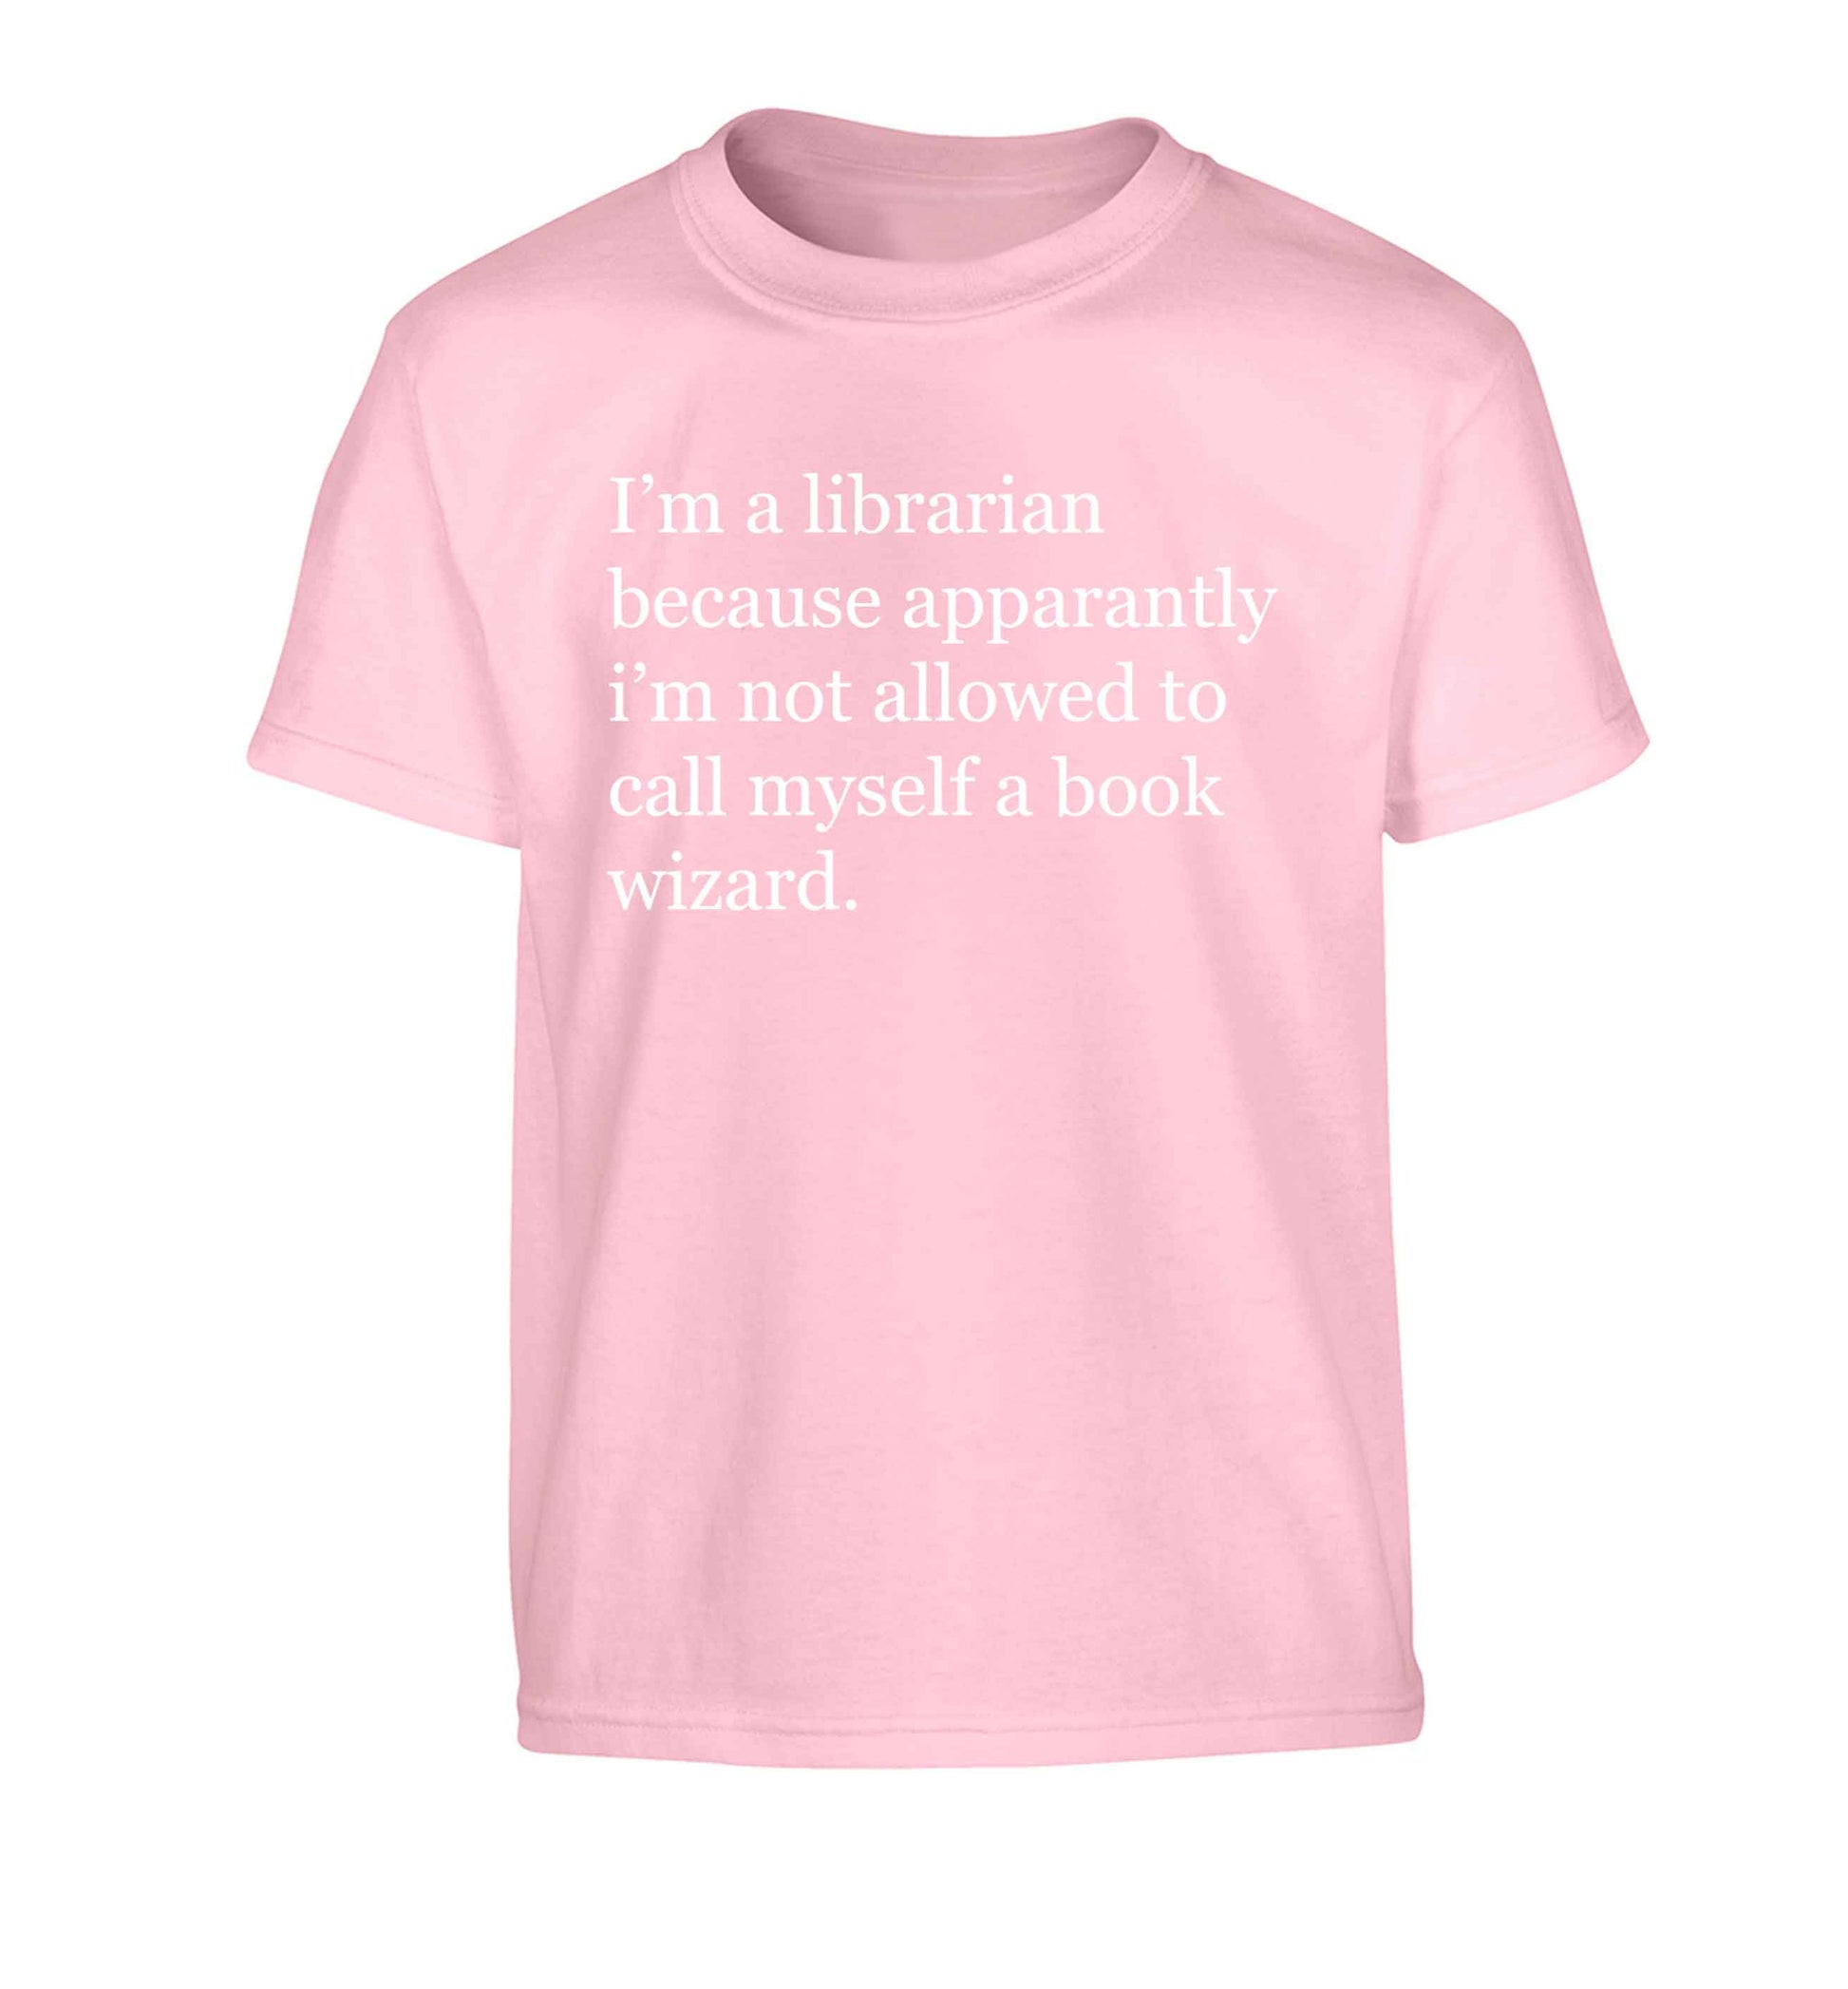 iÕm a librarian because apparantly iÕm not allowed to call myself a book wizard Children's light pink Tshirt 12-13 Years